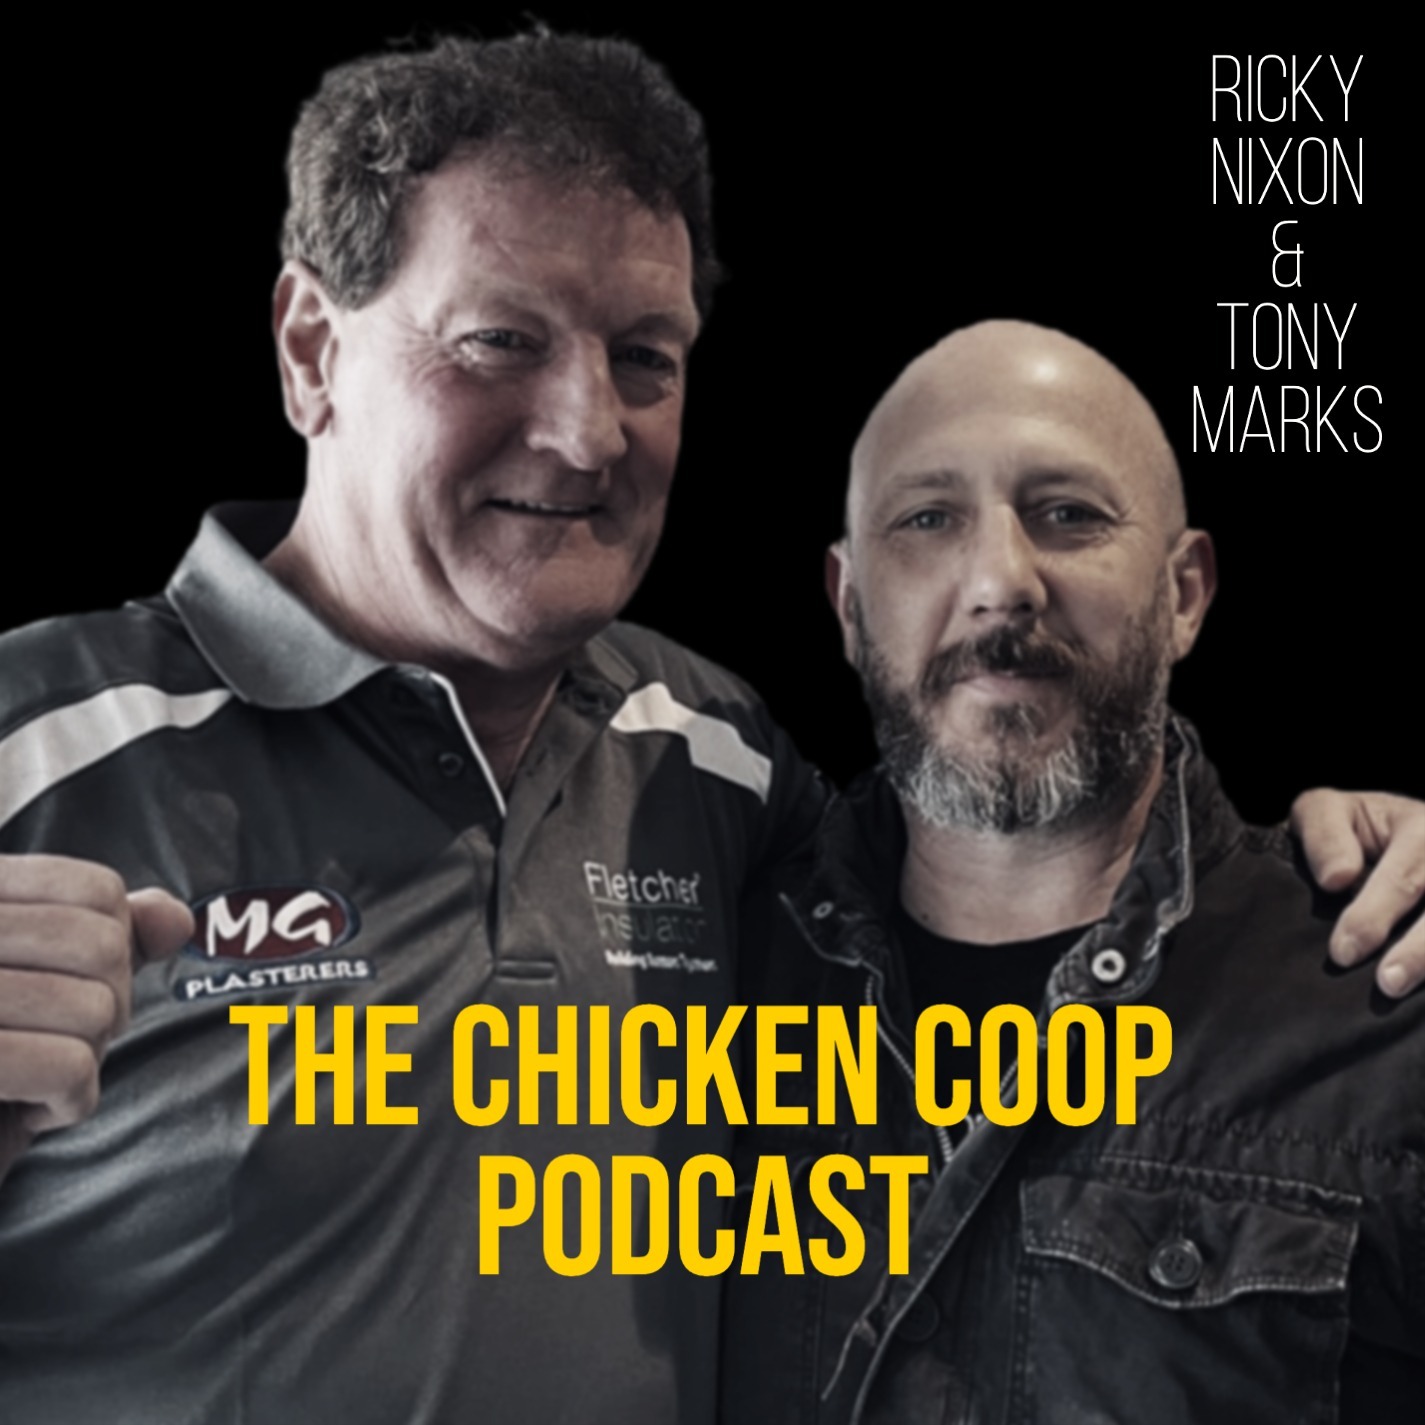 The Chicken Coop with Ricky Nixon & Tony Marks - Episode 3